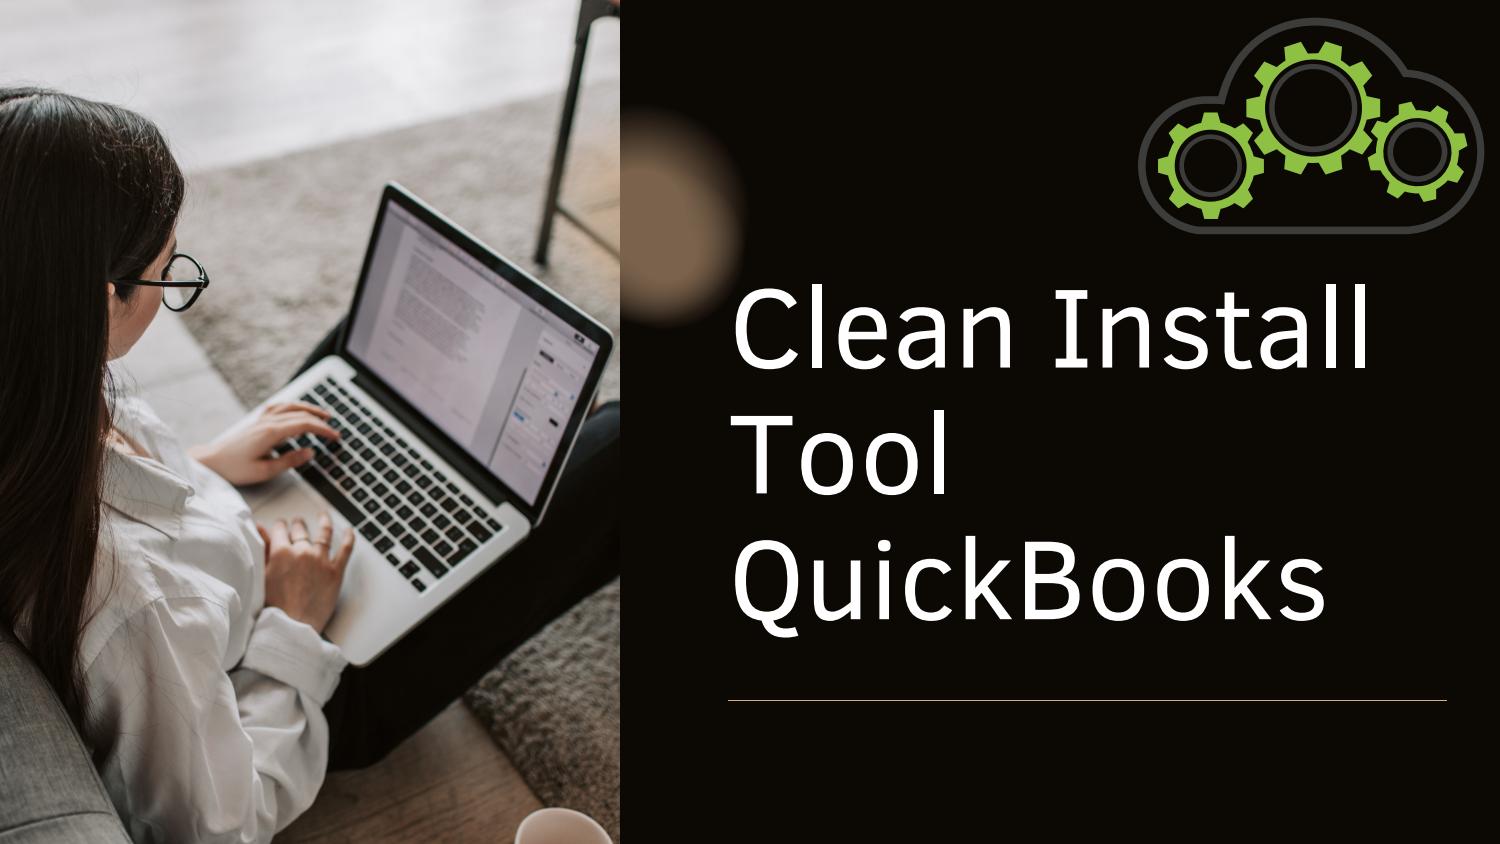 QuickBooks Clean Install Tool- Download and Usage [Complete Guide]